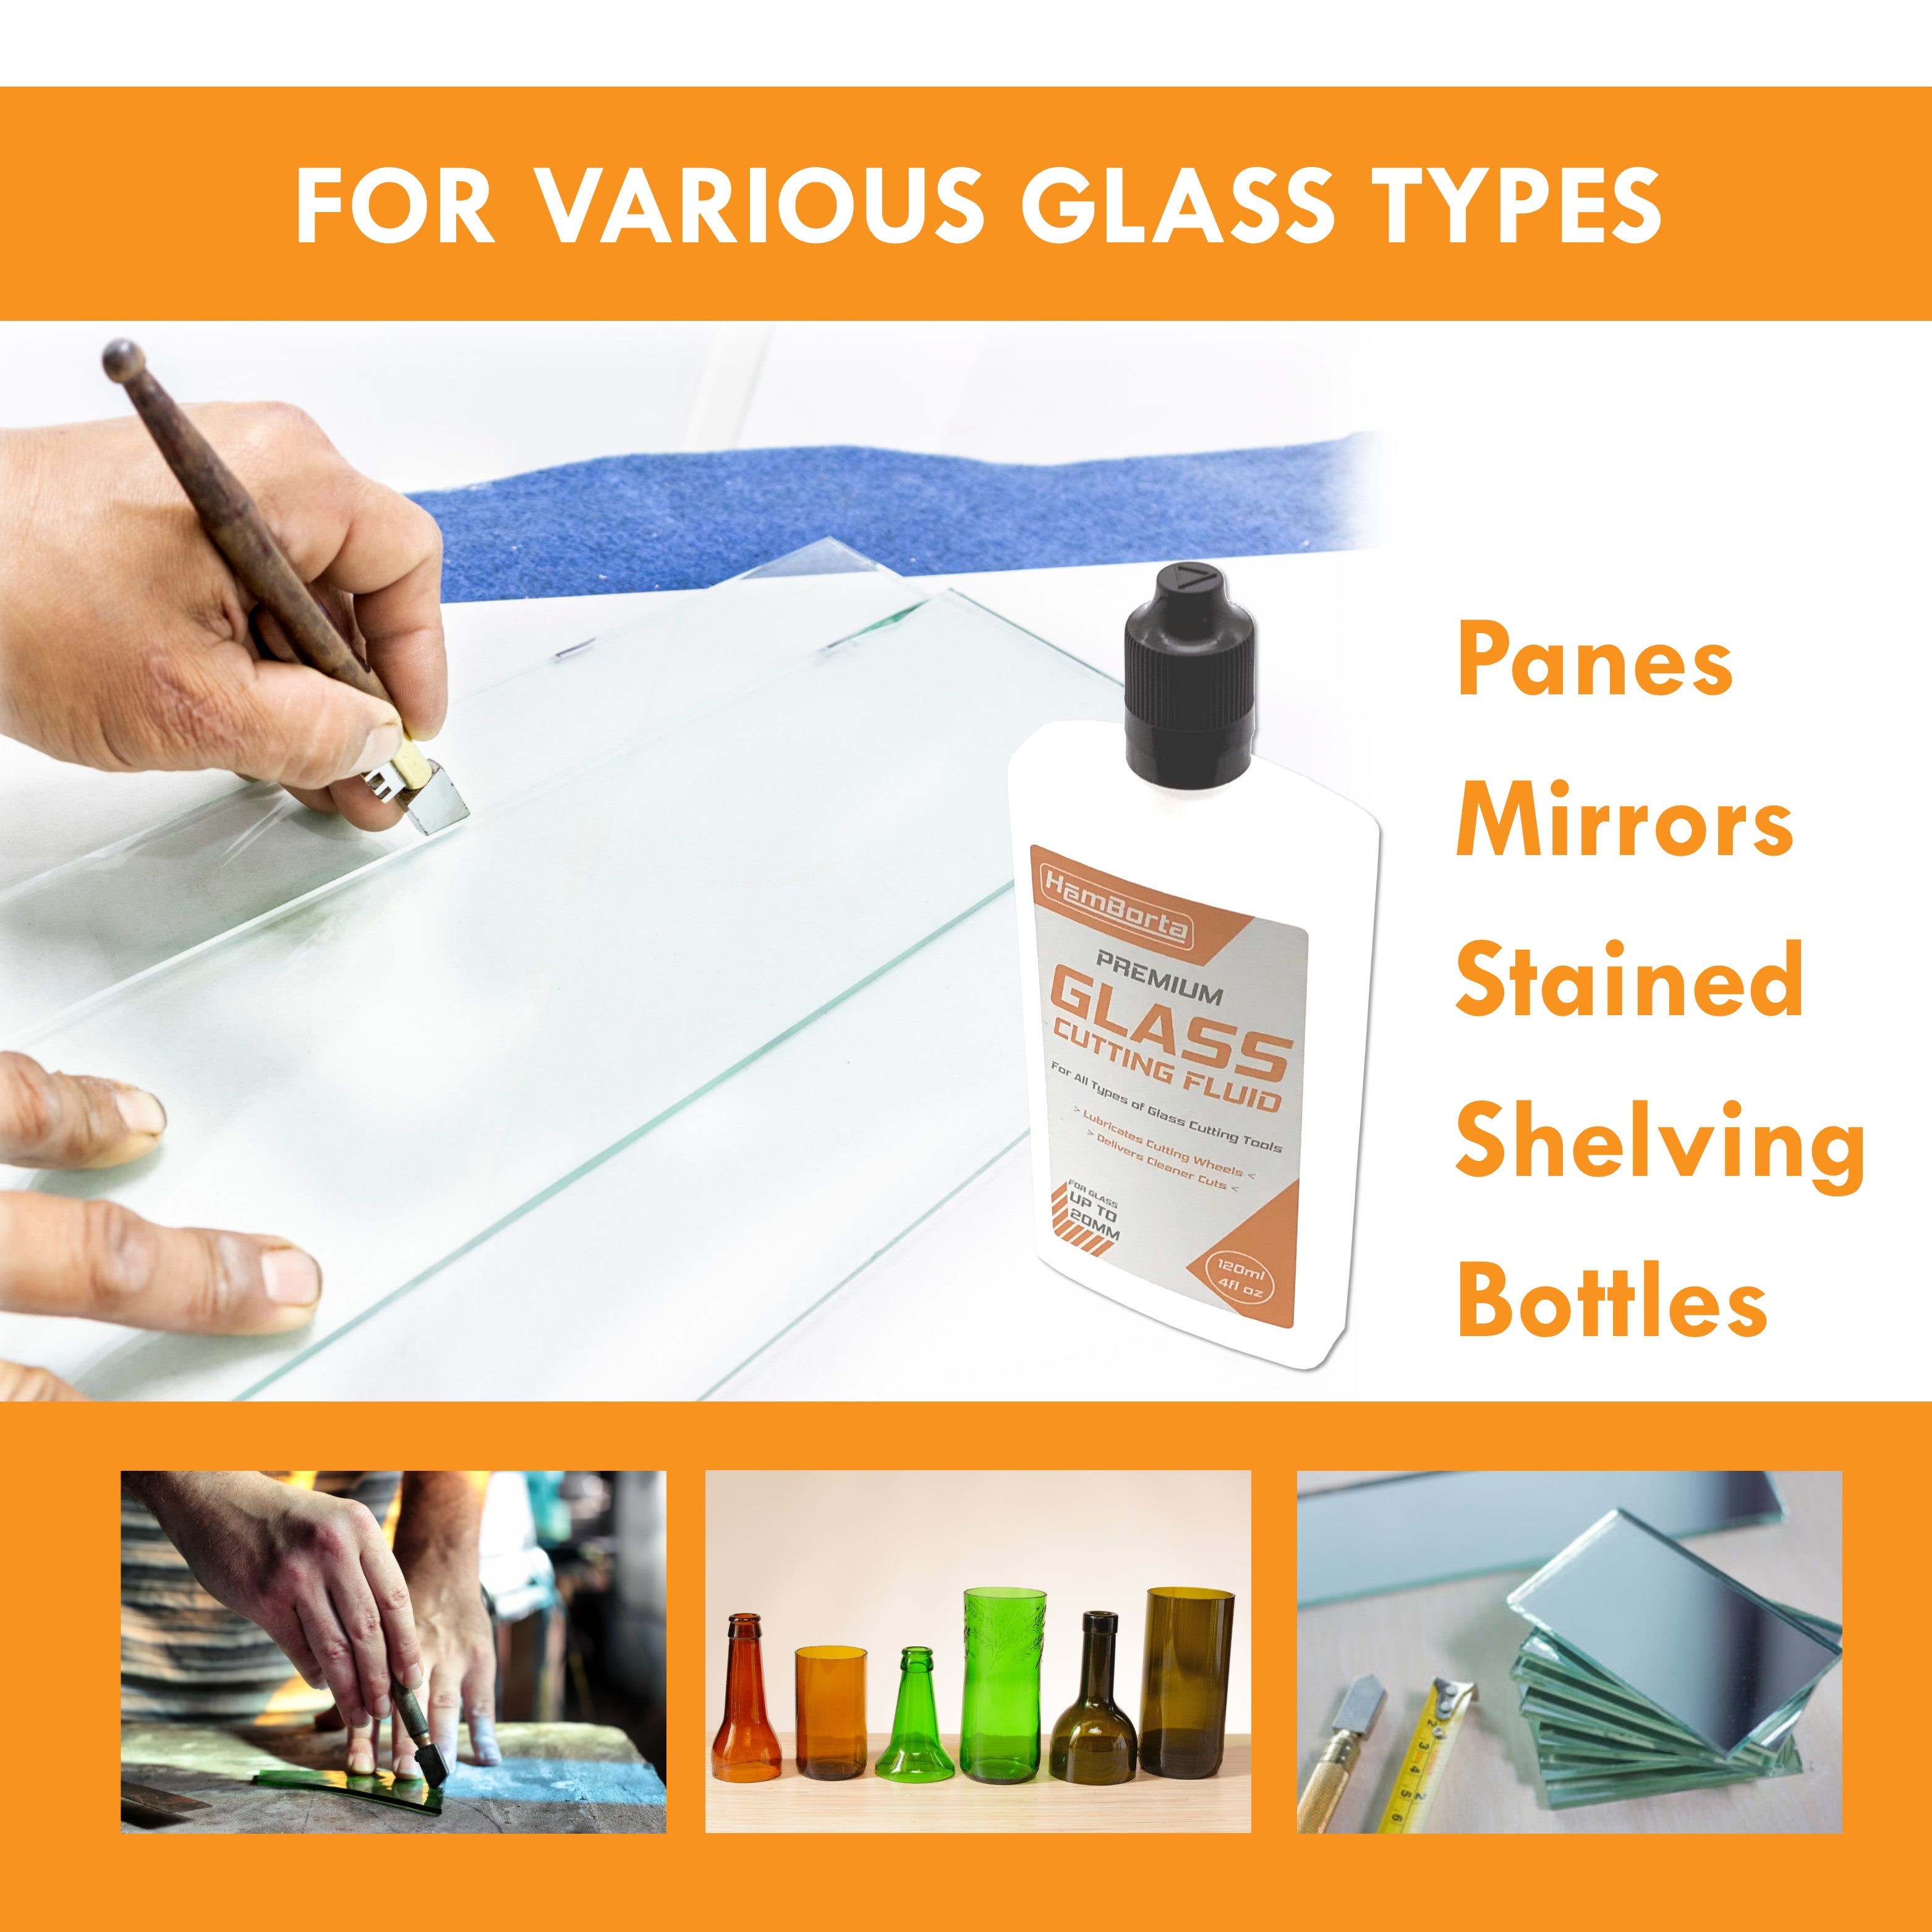 Glass & Mirror Cutting Tools - Overview